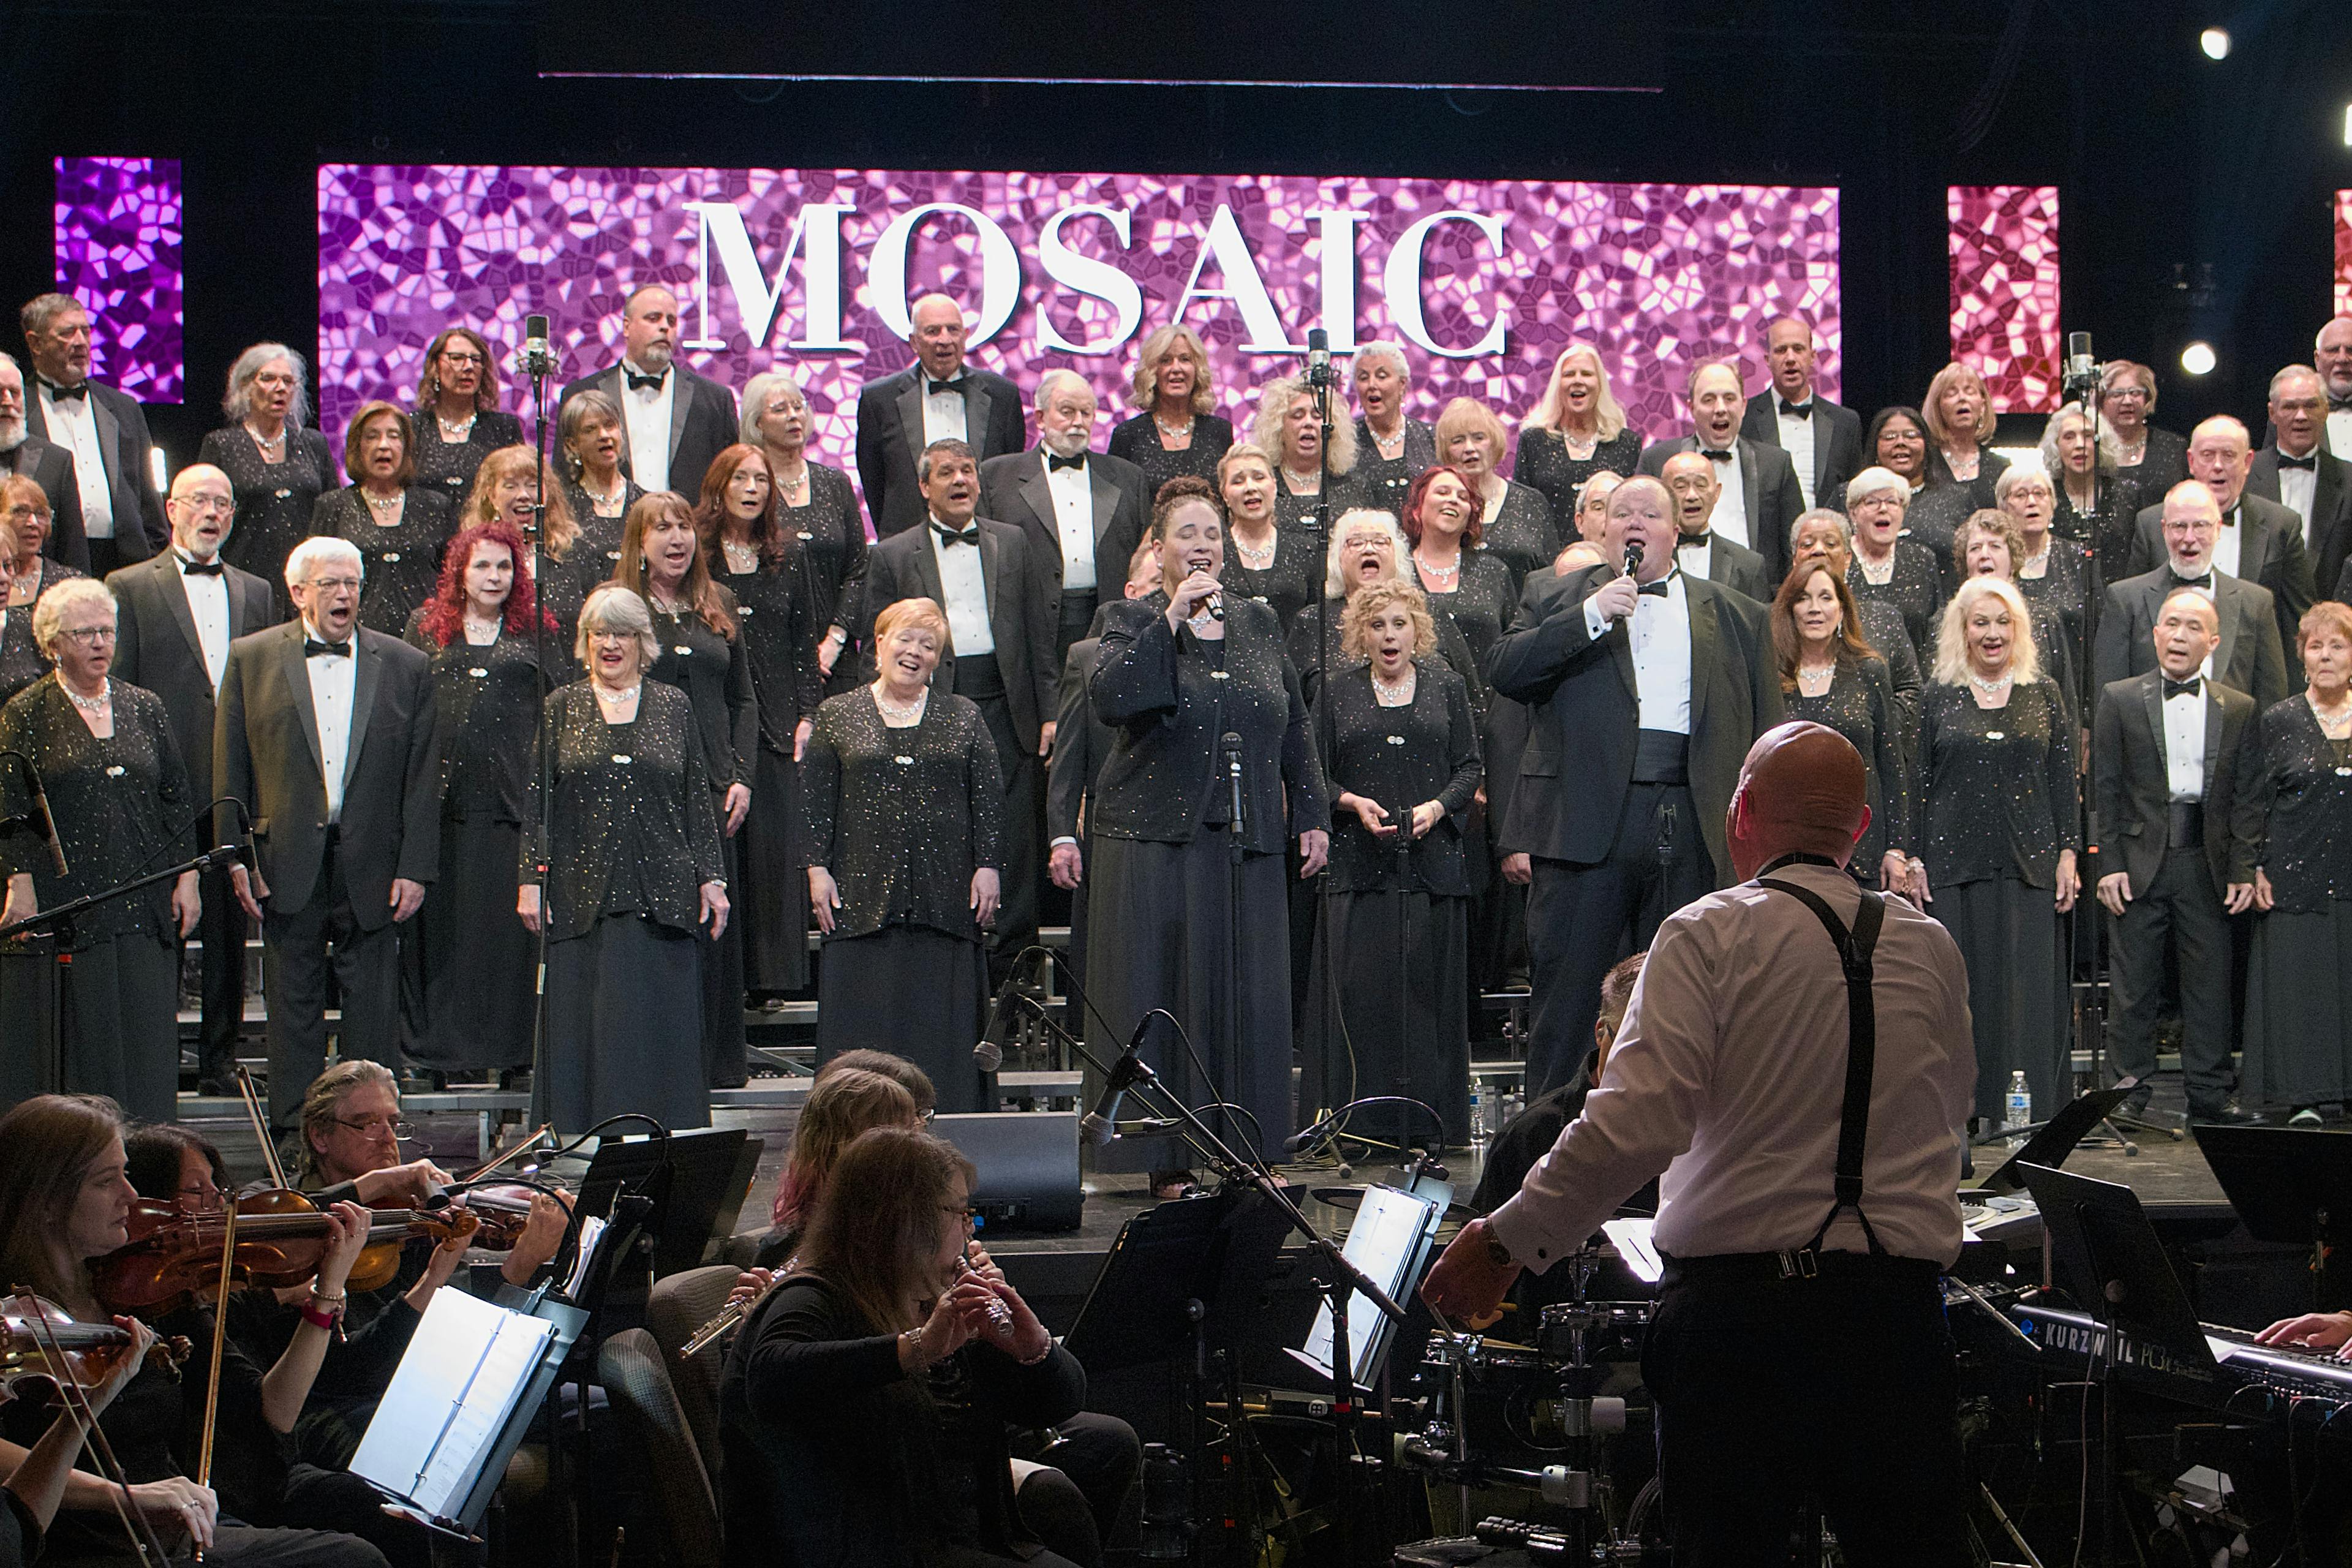 Full choir and orchestra performing on stage